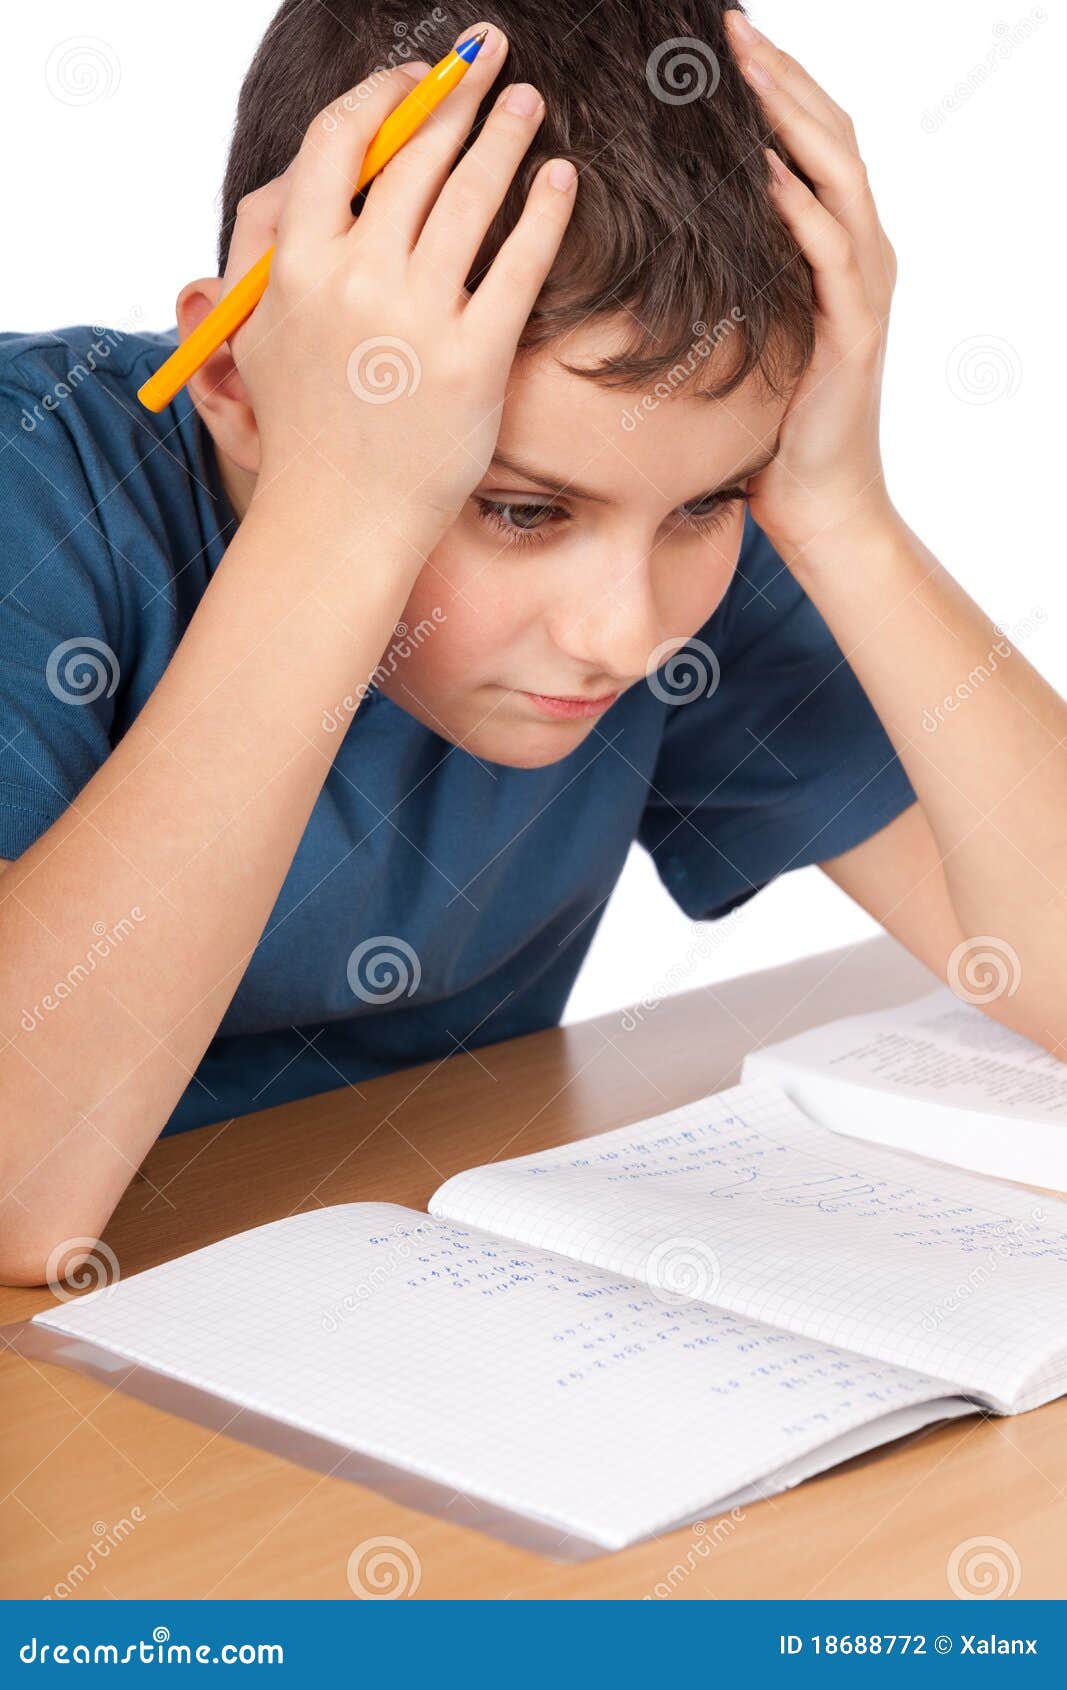 are students receiving too much homework